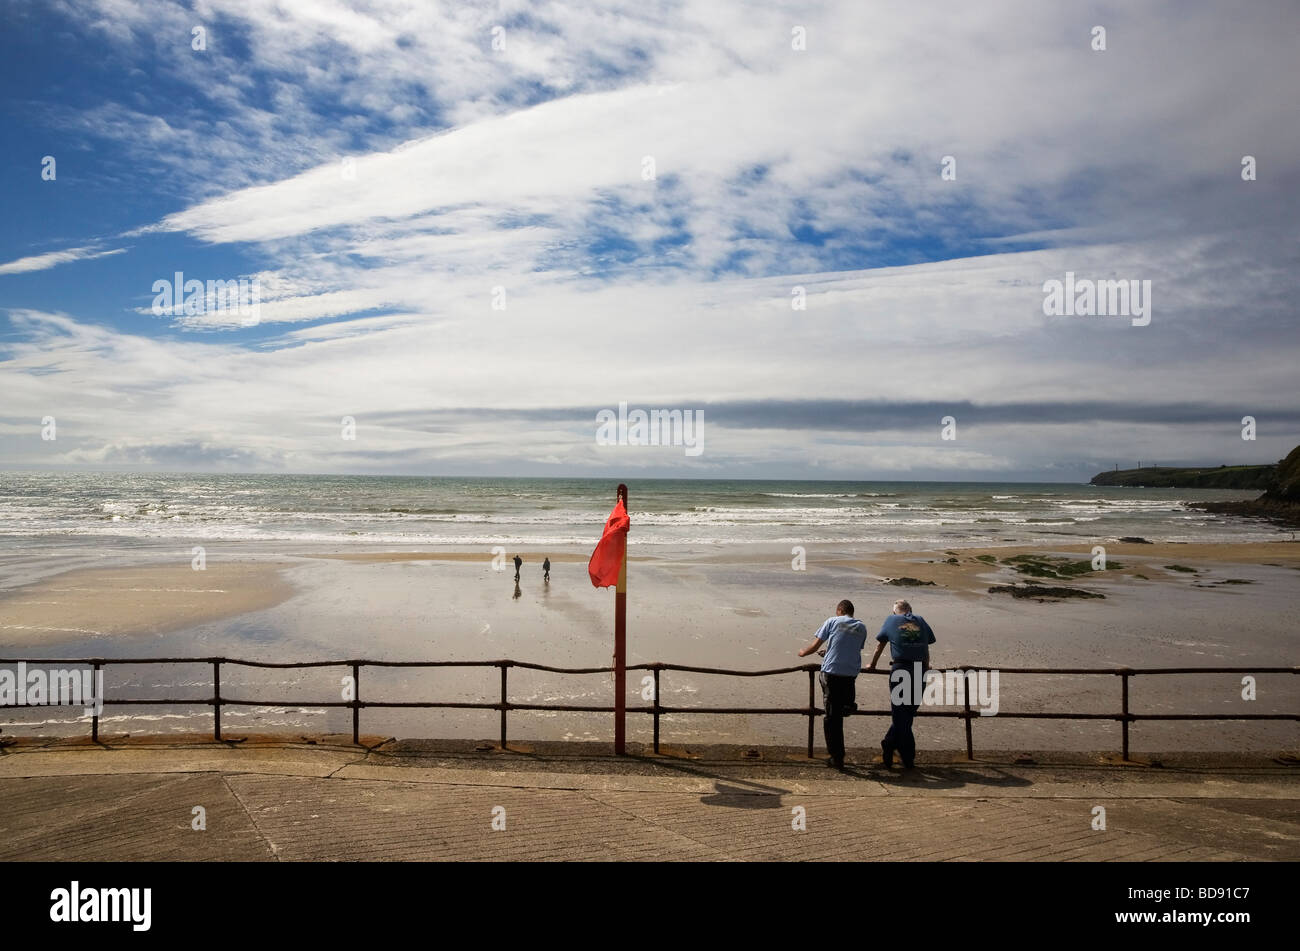 The Promenade Beach and distant Newton Head, Tramore, County Waterford, Ireland Stock Photo